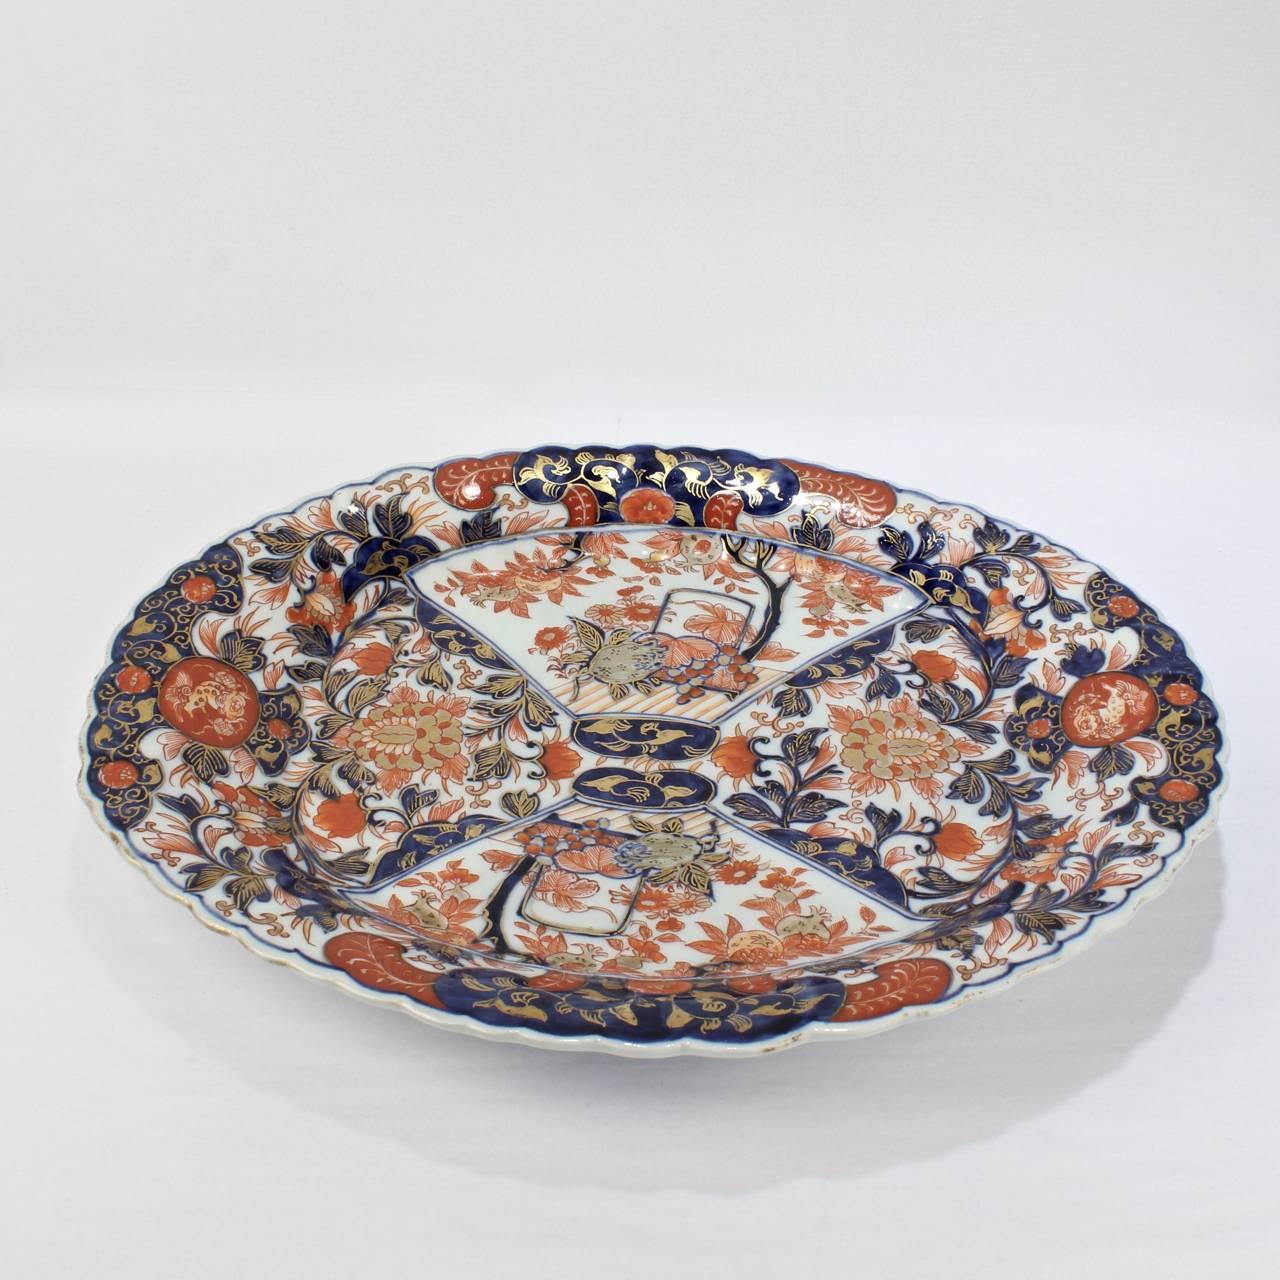 A fine large oval Japanese Imari Porcelain platter or tray. 

In traditional blue and red decoration with gold highlights throughout. 

Width: circa 14 7/8 in. 

Items purchased from David Sterner antiques must delight you. Purchases may be